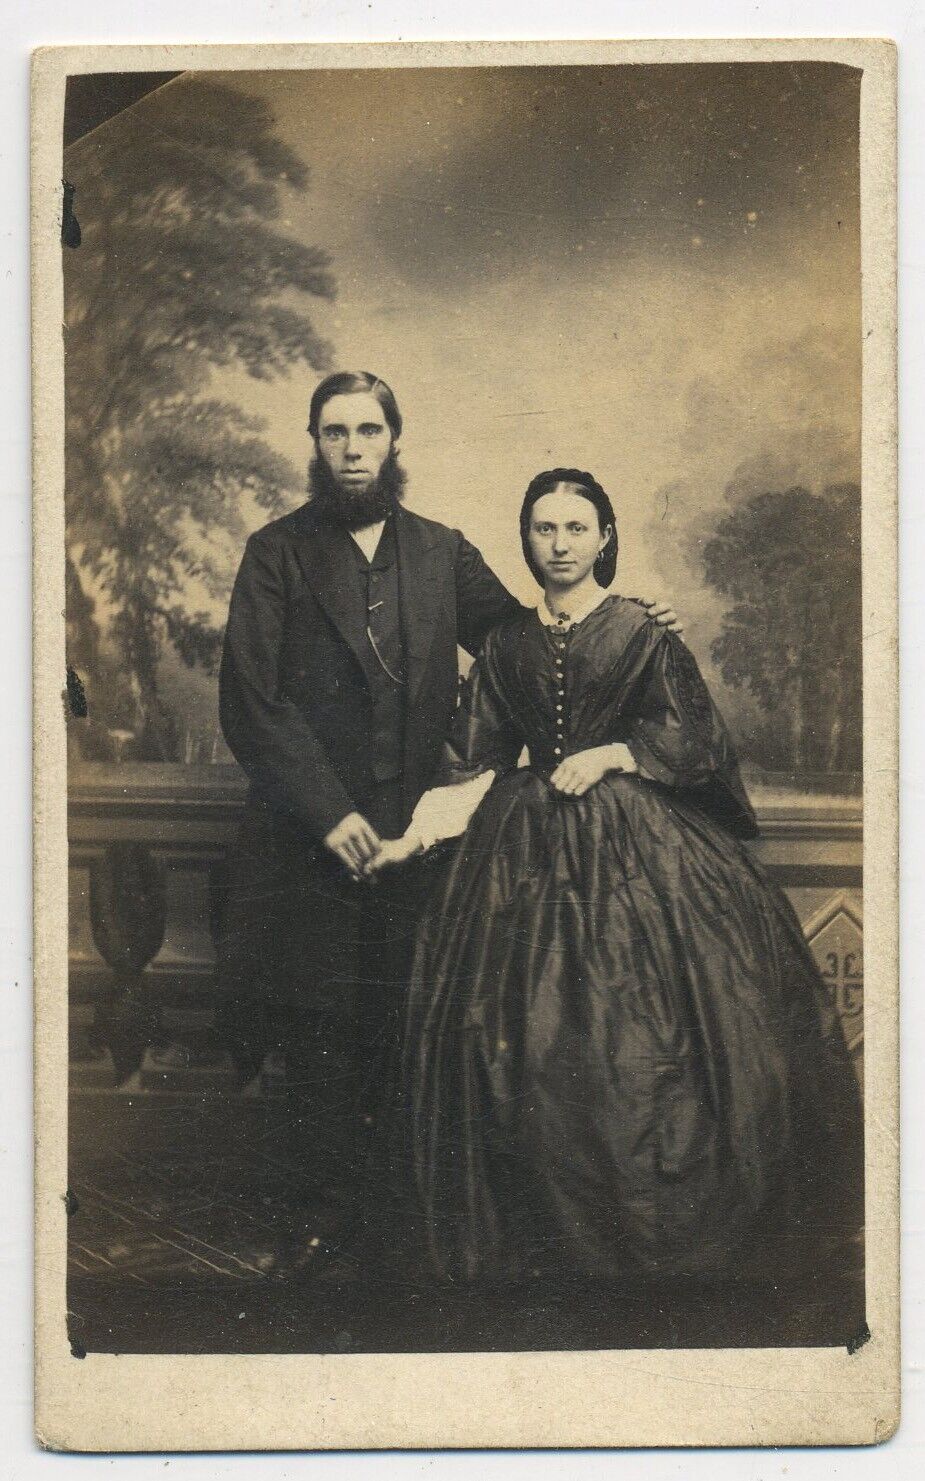 Husband & Wife Holding Hands by Gilchrist Edinburgh Antique CDV Photograph P1